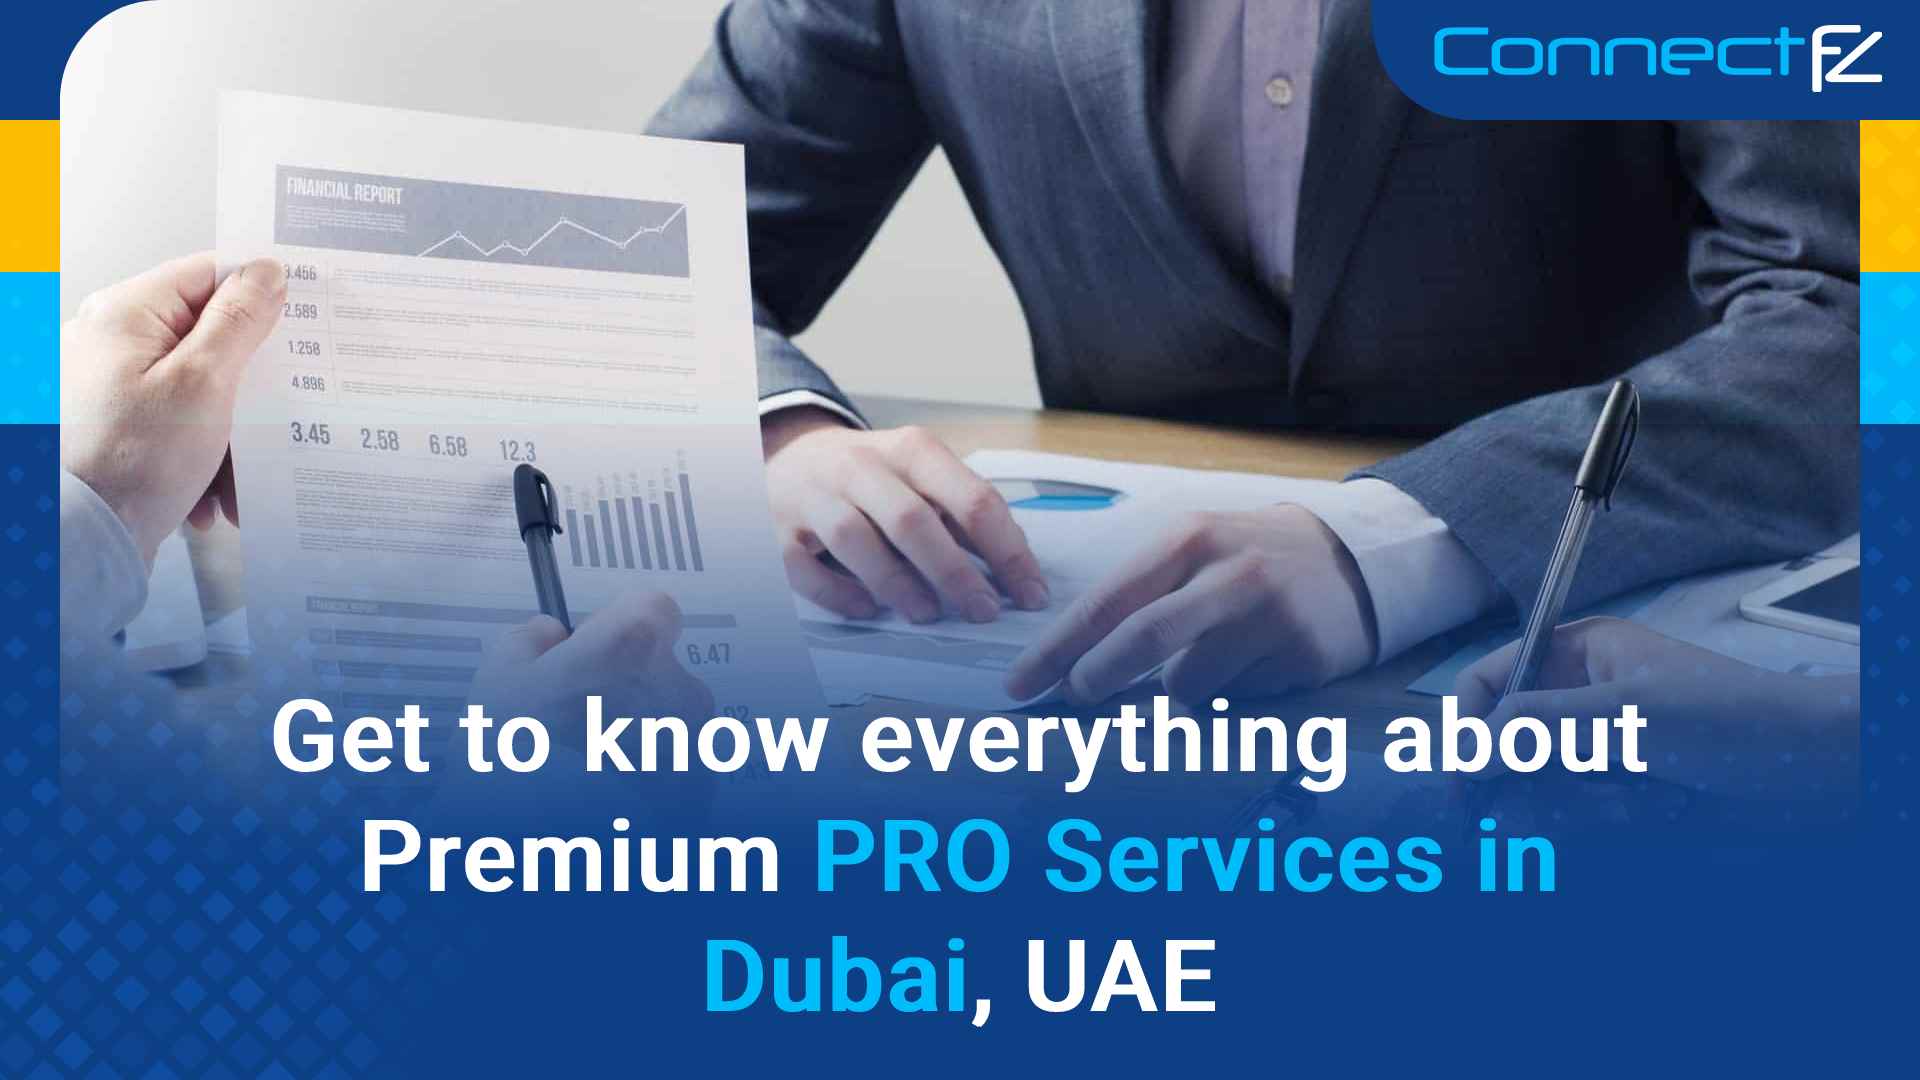 Get to know everything about Premium PRO Services in Dubai, UAE